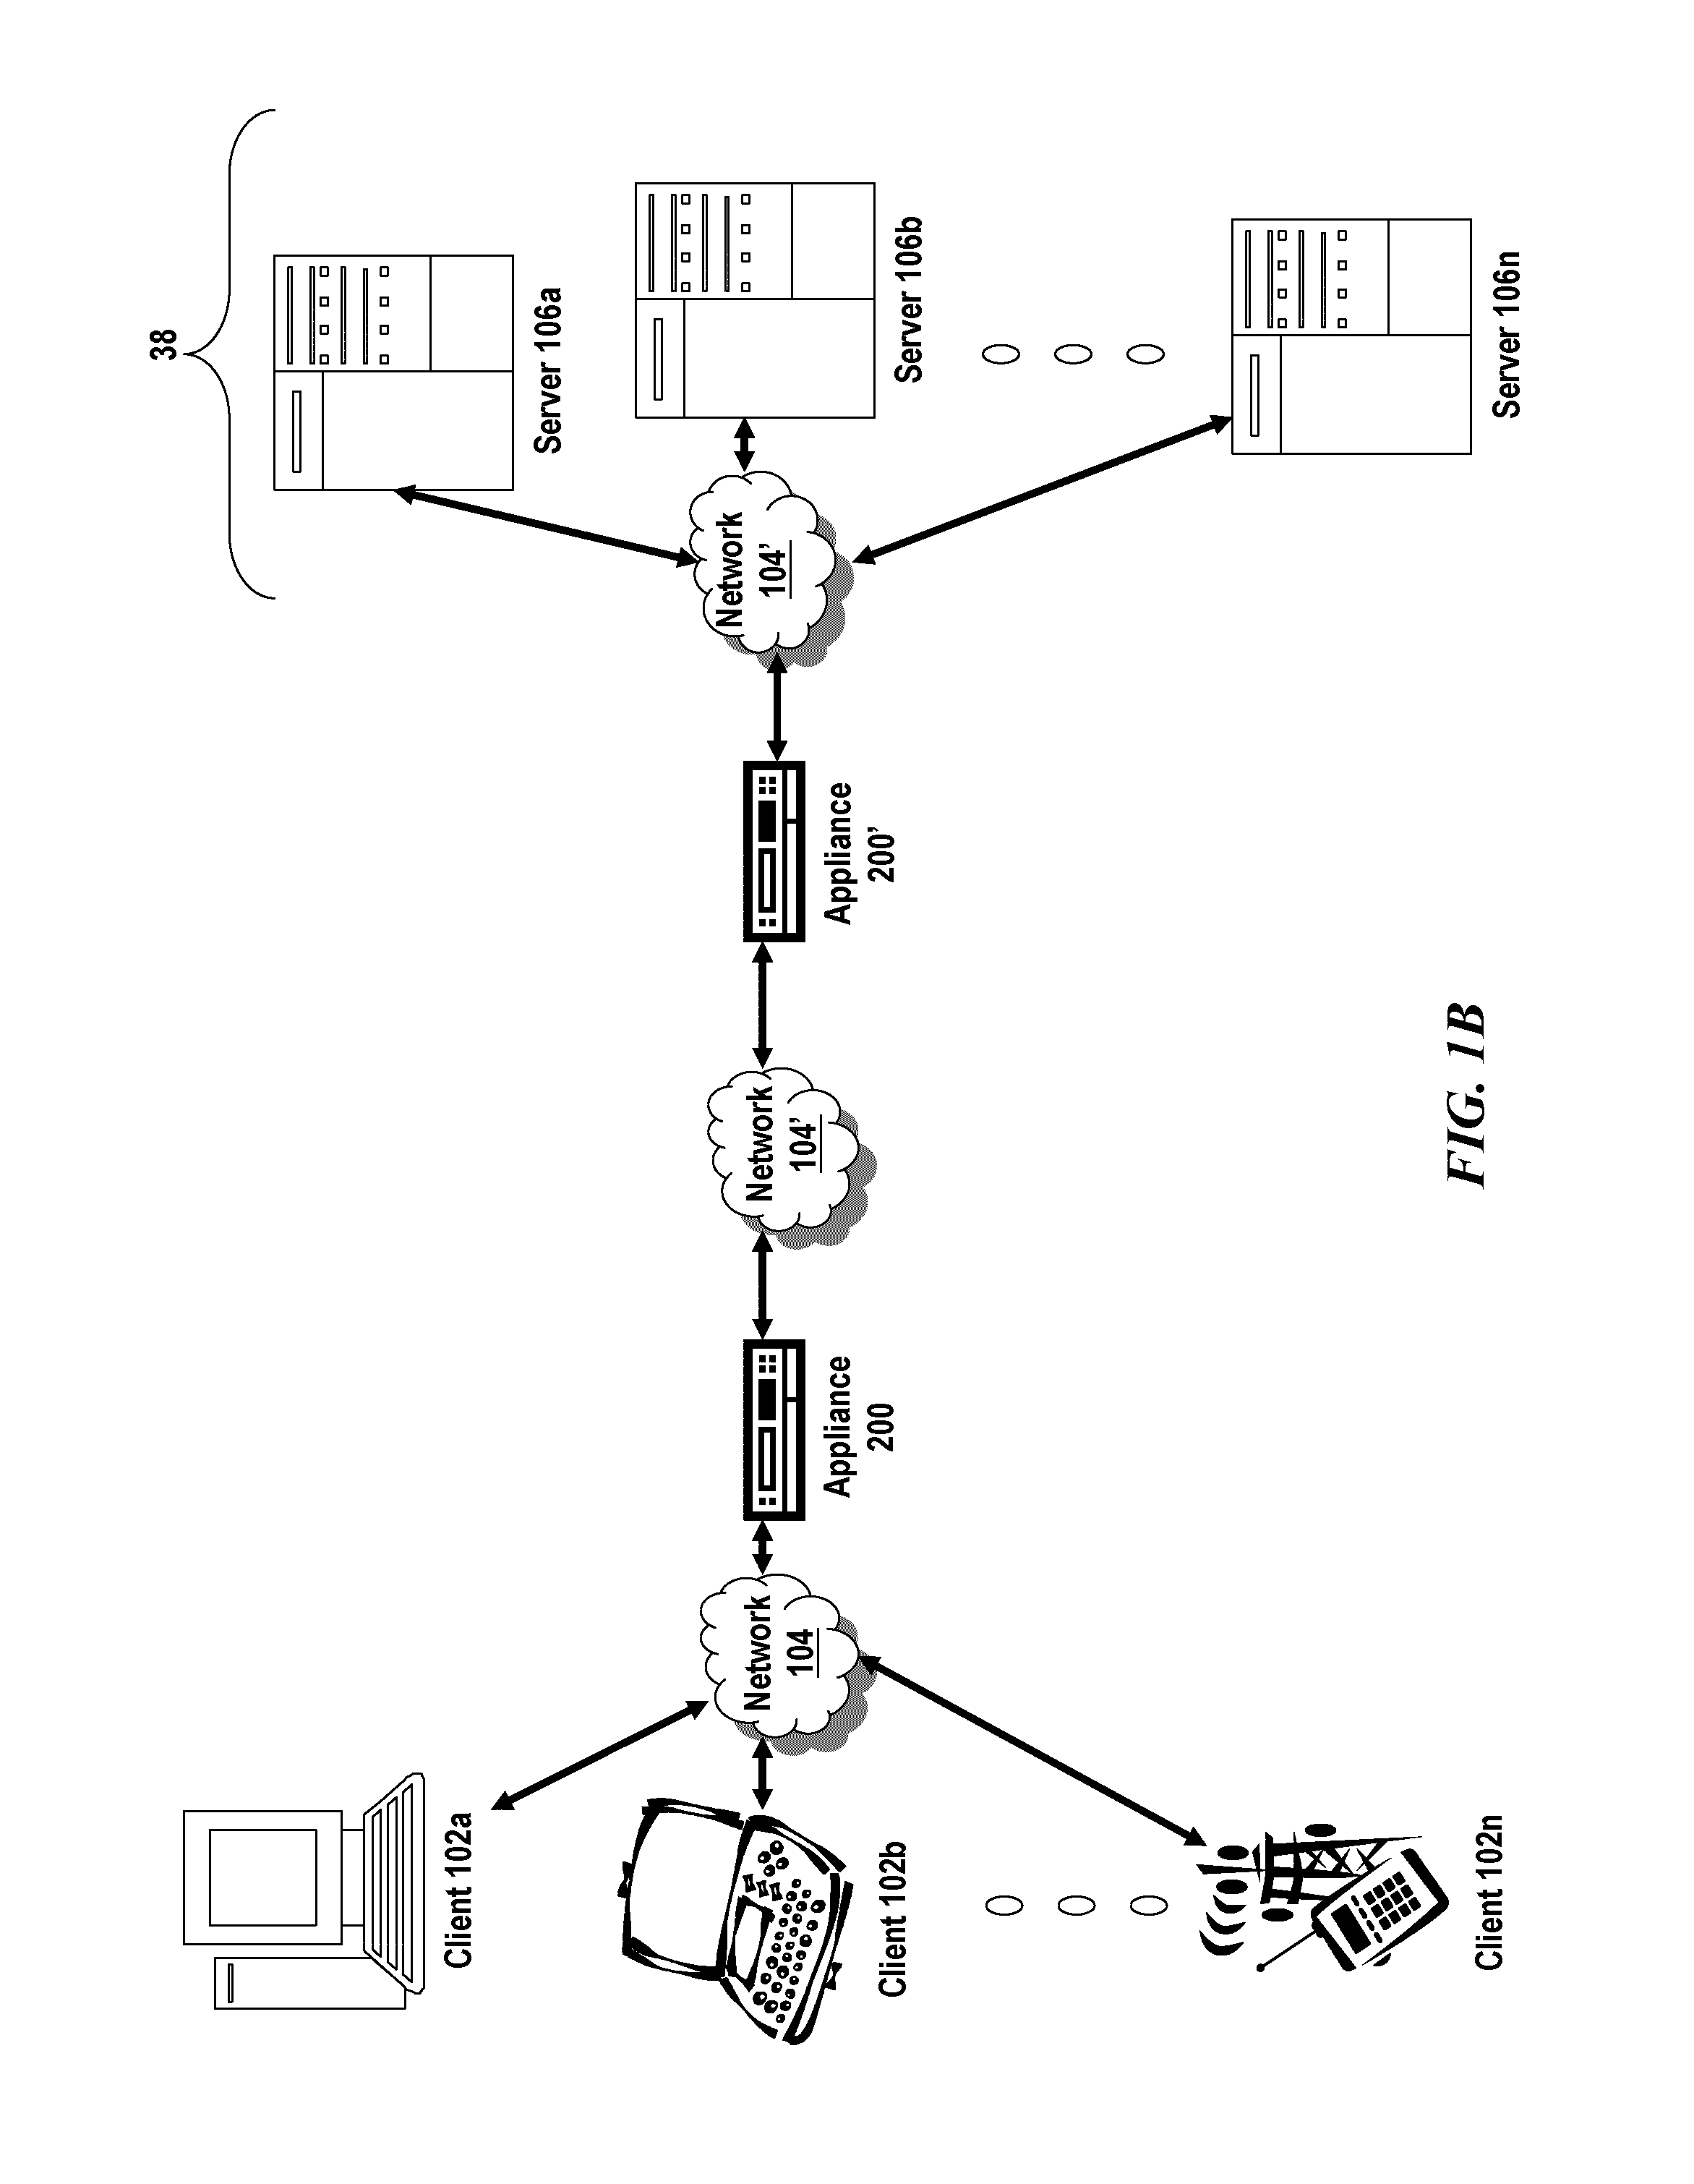 Systems and methods for stateful session failover between multi-core appliances